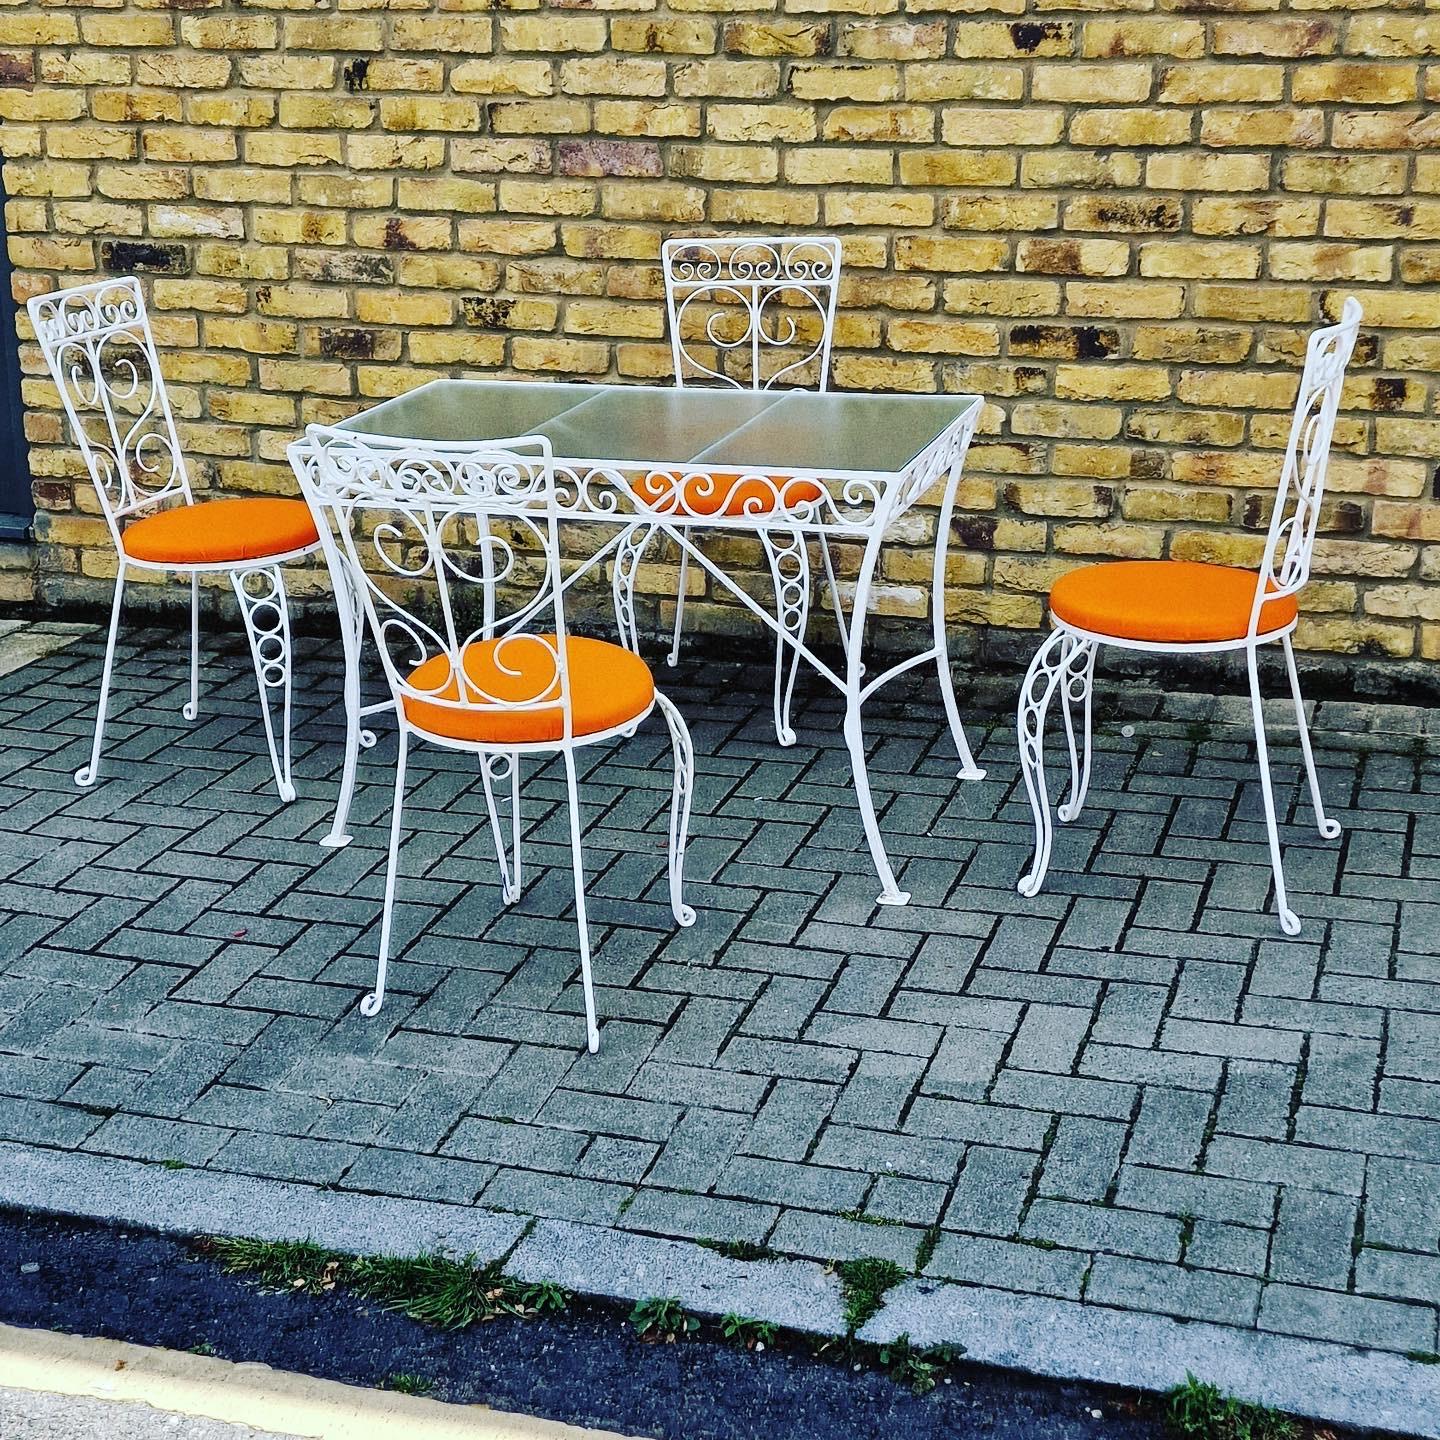 This is a compact garden set decorative glass topped metal table and 4 orange seated chairs.

1950’s French.